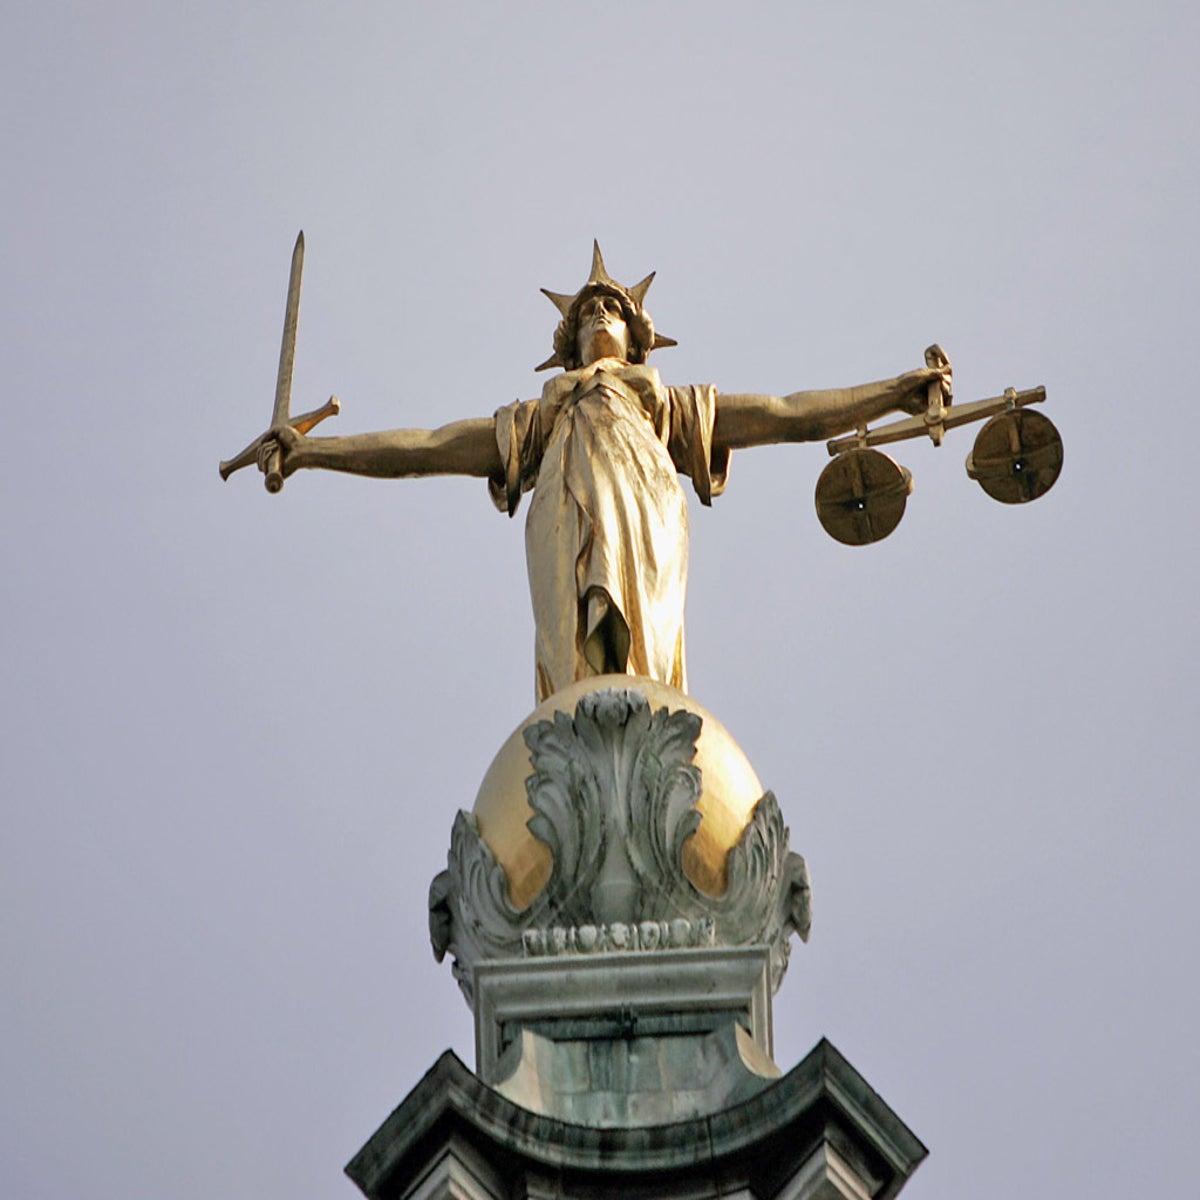 Why has it become so hard to prosecute rape cases?, UK News